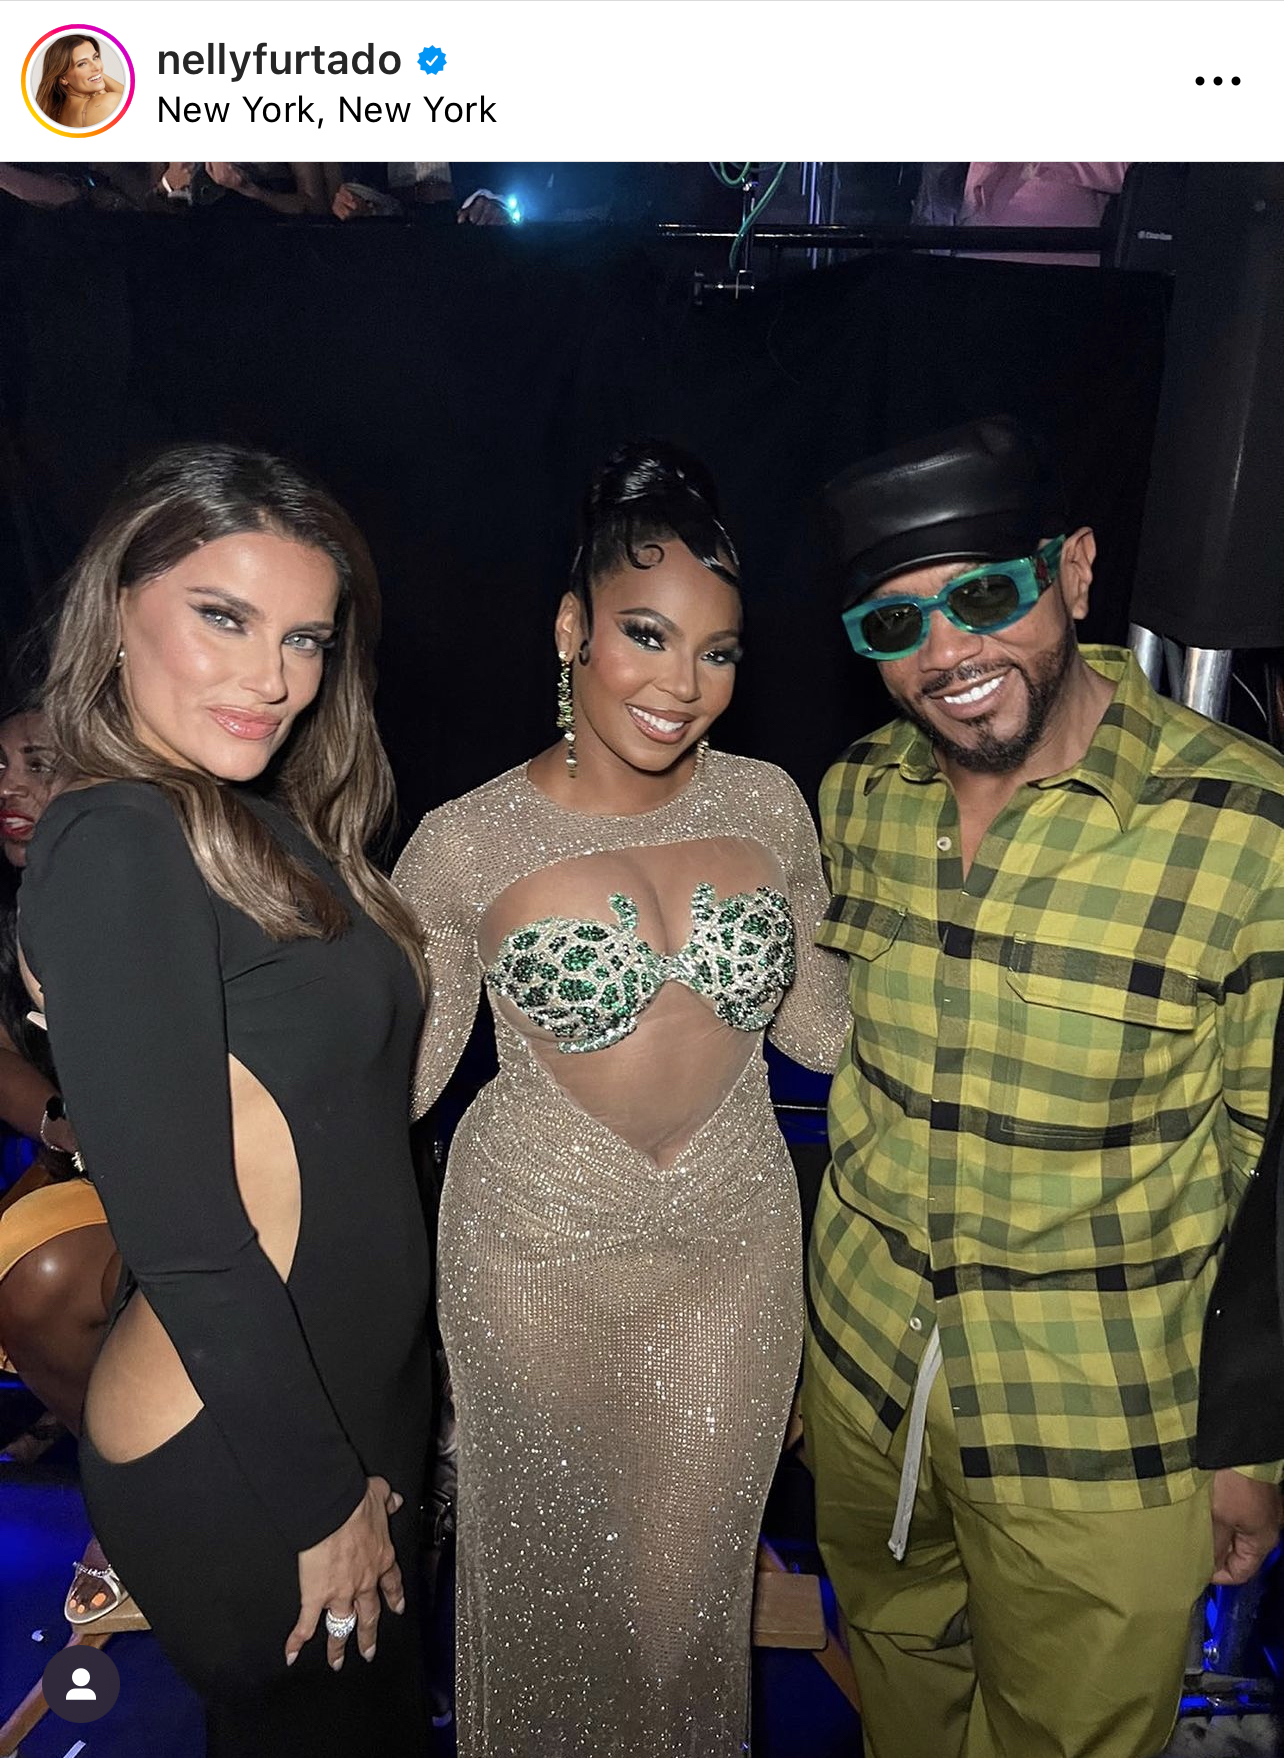 From left: Nelly Furtado, Ashanti, and Timbaland pose backstage.